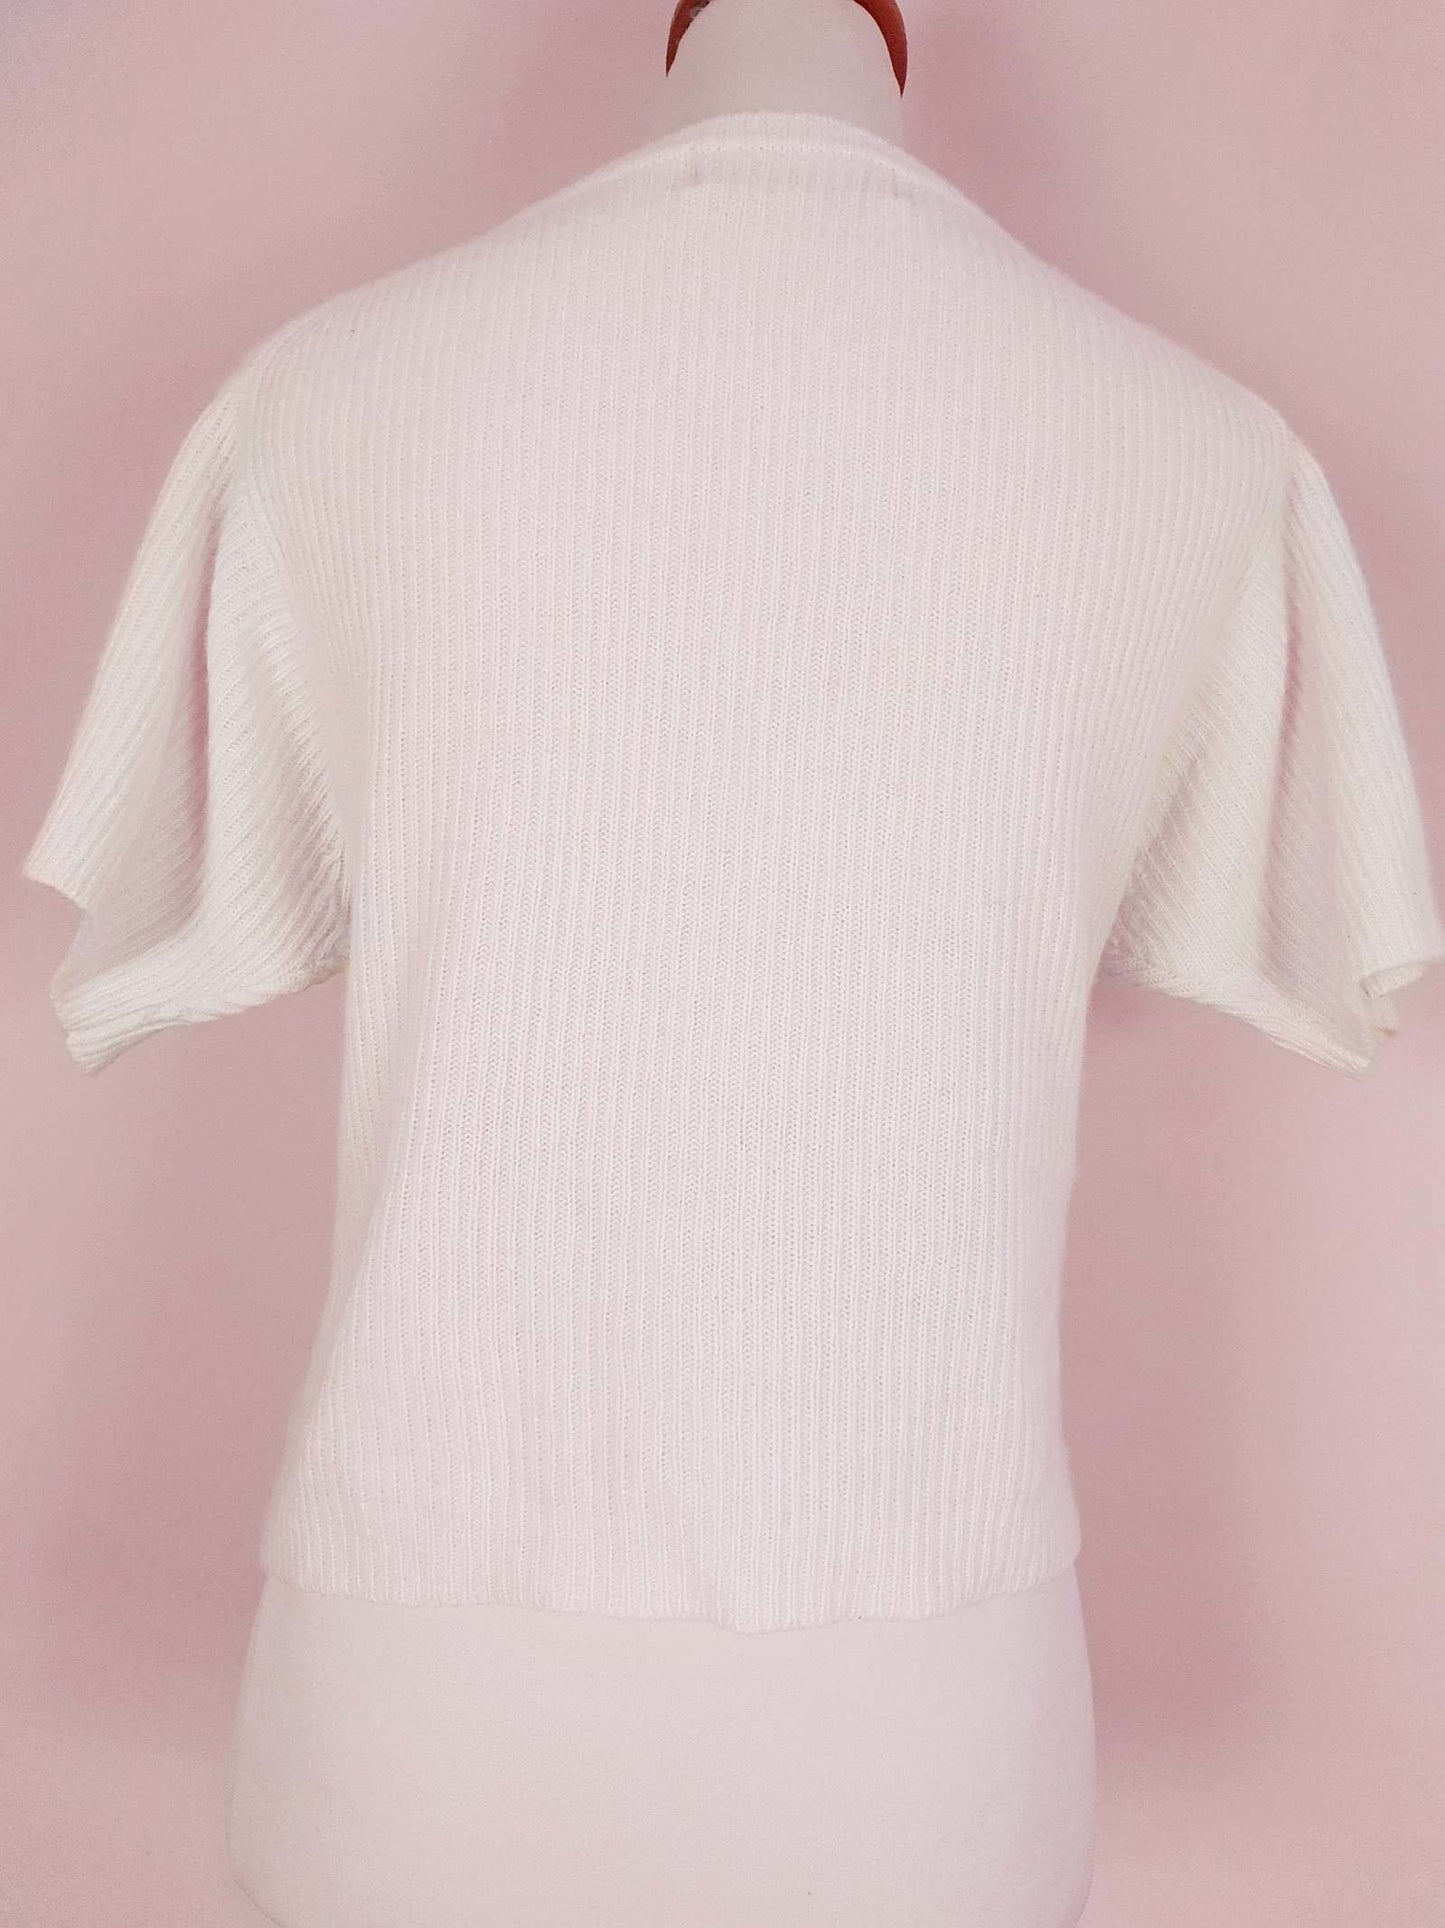 Vintage Cream Lambswool Angora Jumper Pullover Knit Top Size 10/12